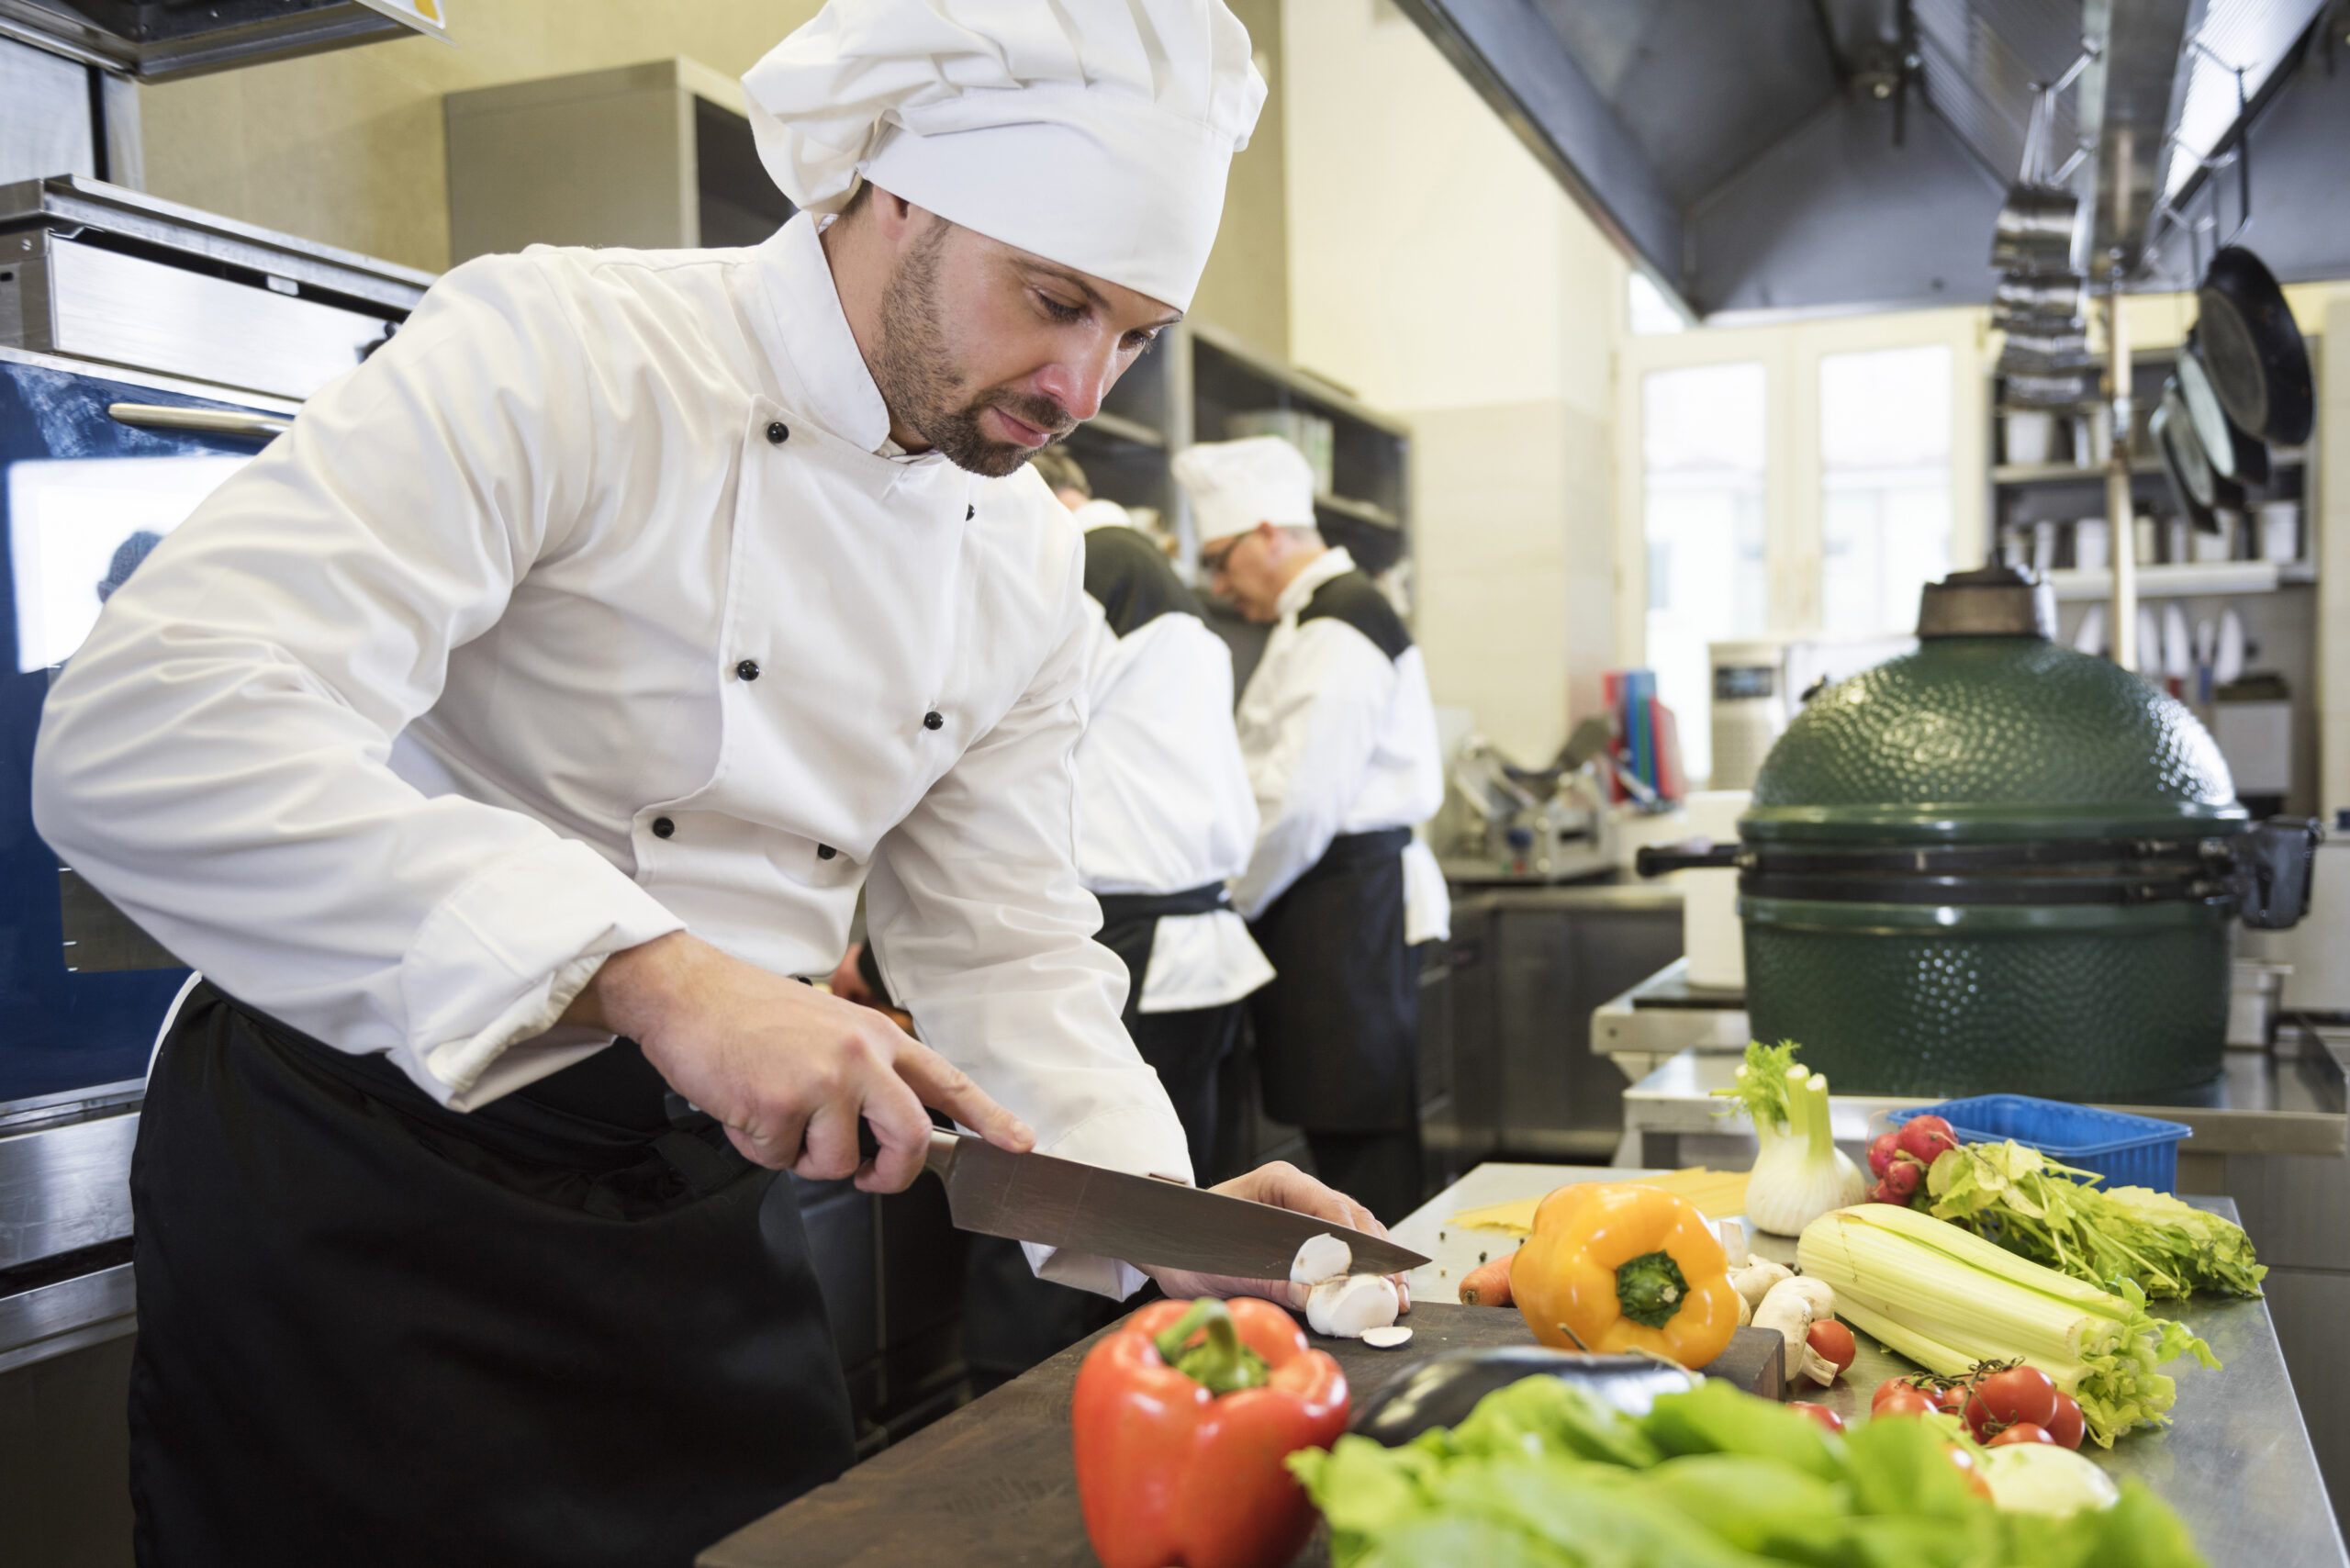 Where Can a Commercial Cookery Course Take You?